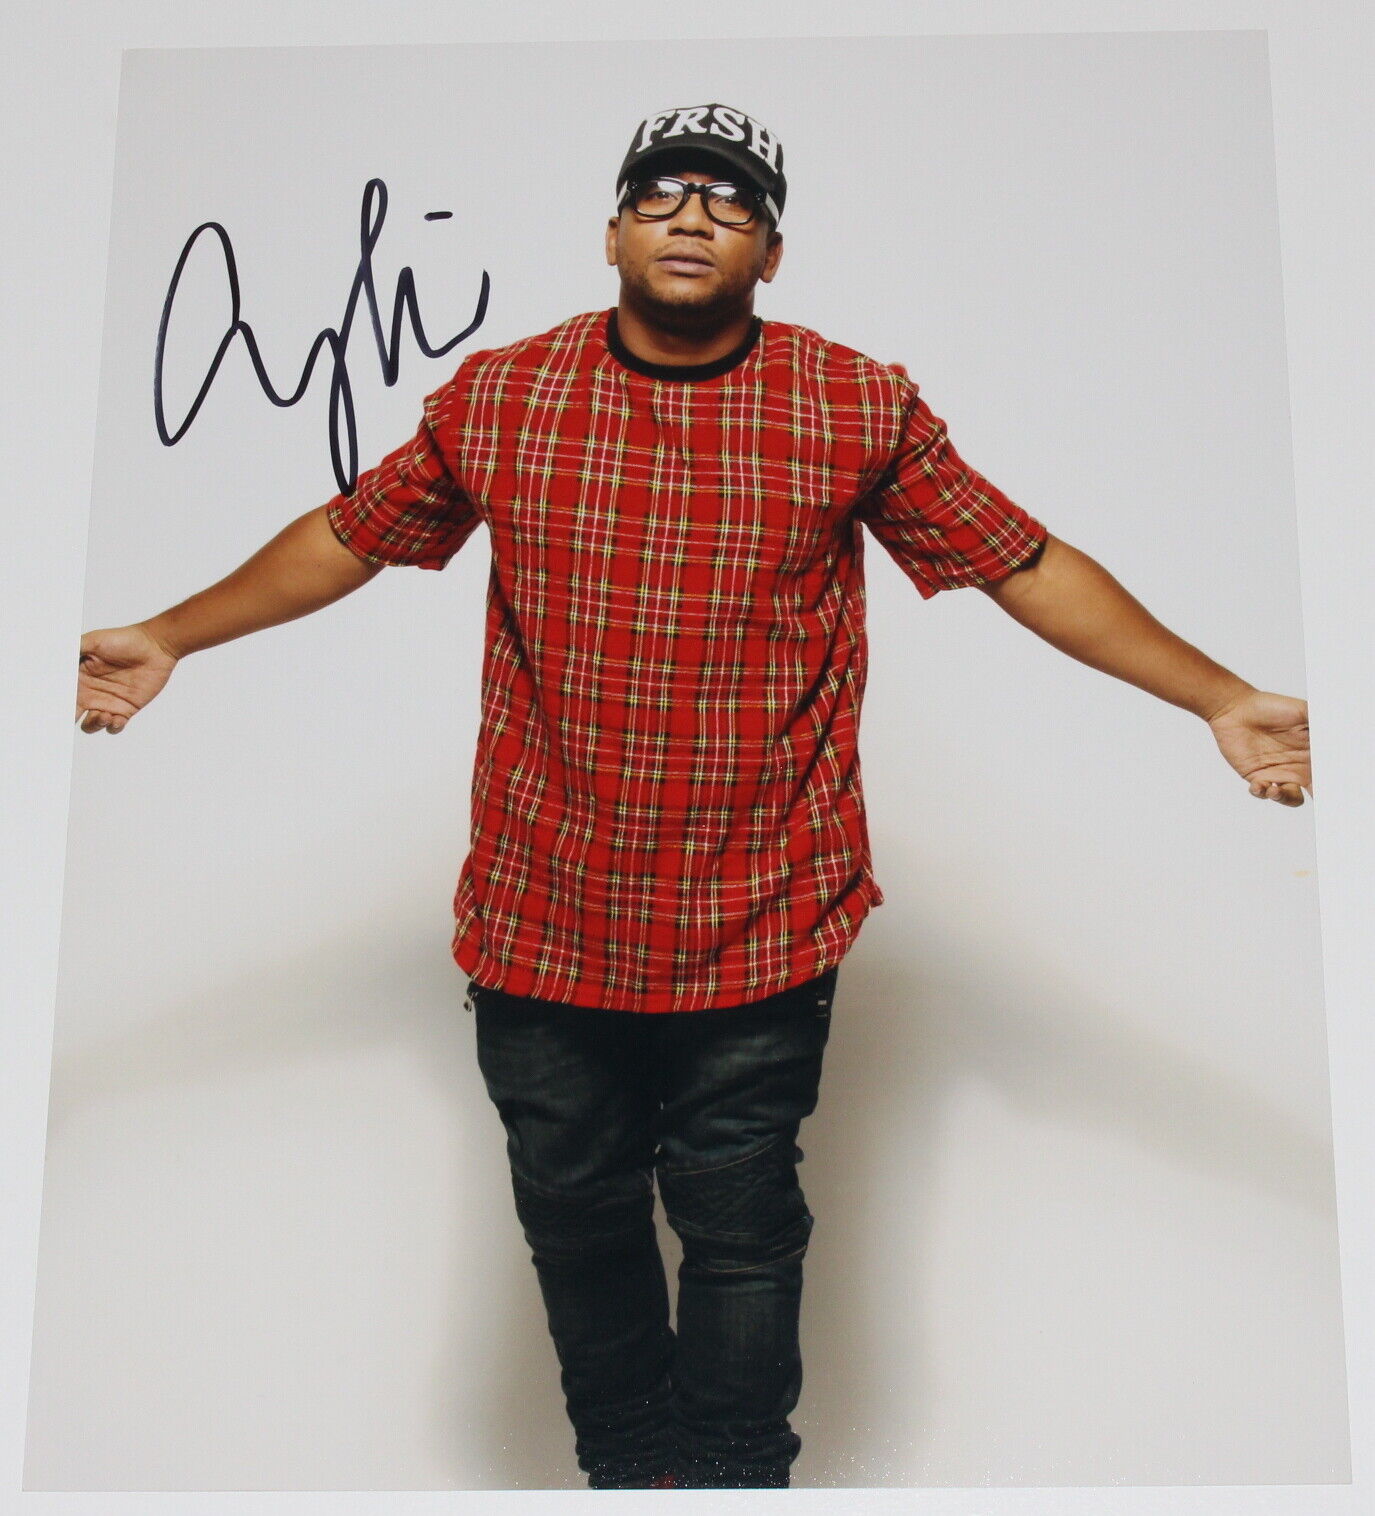 RAPPER CYHI THE PRYNCE SIGNED AUTHENTIC 11x14 Photo Poster painting w/COA GOOD MUSIC KANYE WEST